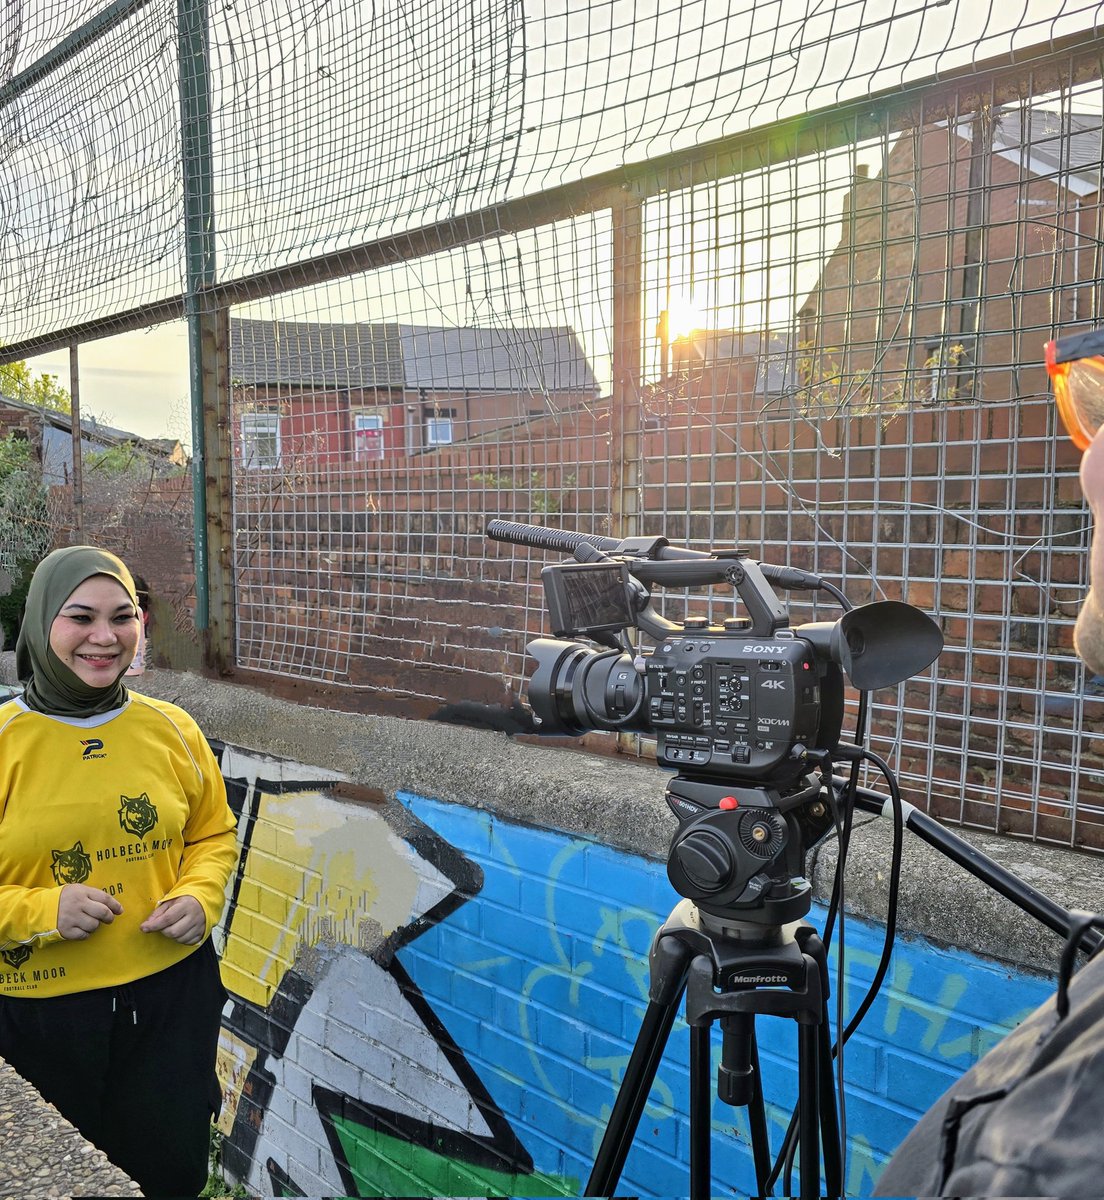 Sunshine 🌞 Beautiful Spring 🌸 Very happy today to share as an ambassador to @HolbeckMoorWFC on how its started its journey last 2 years ago in Holbeck and now being one of the successful story of the Asset Based Community Development project in Leeds. #thisismystory